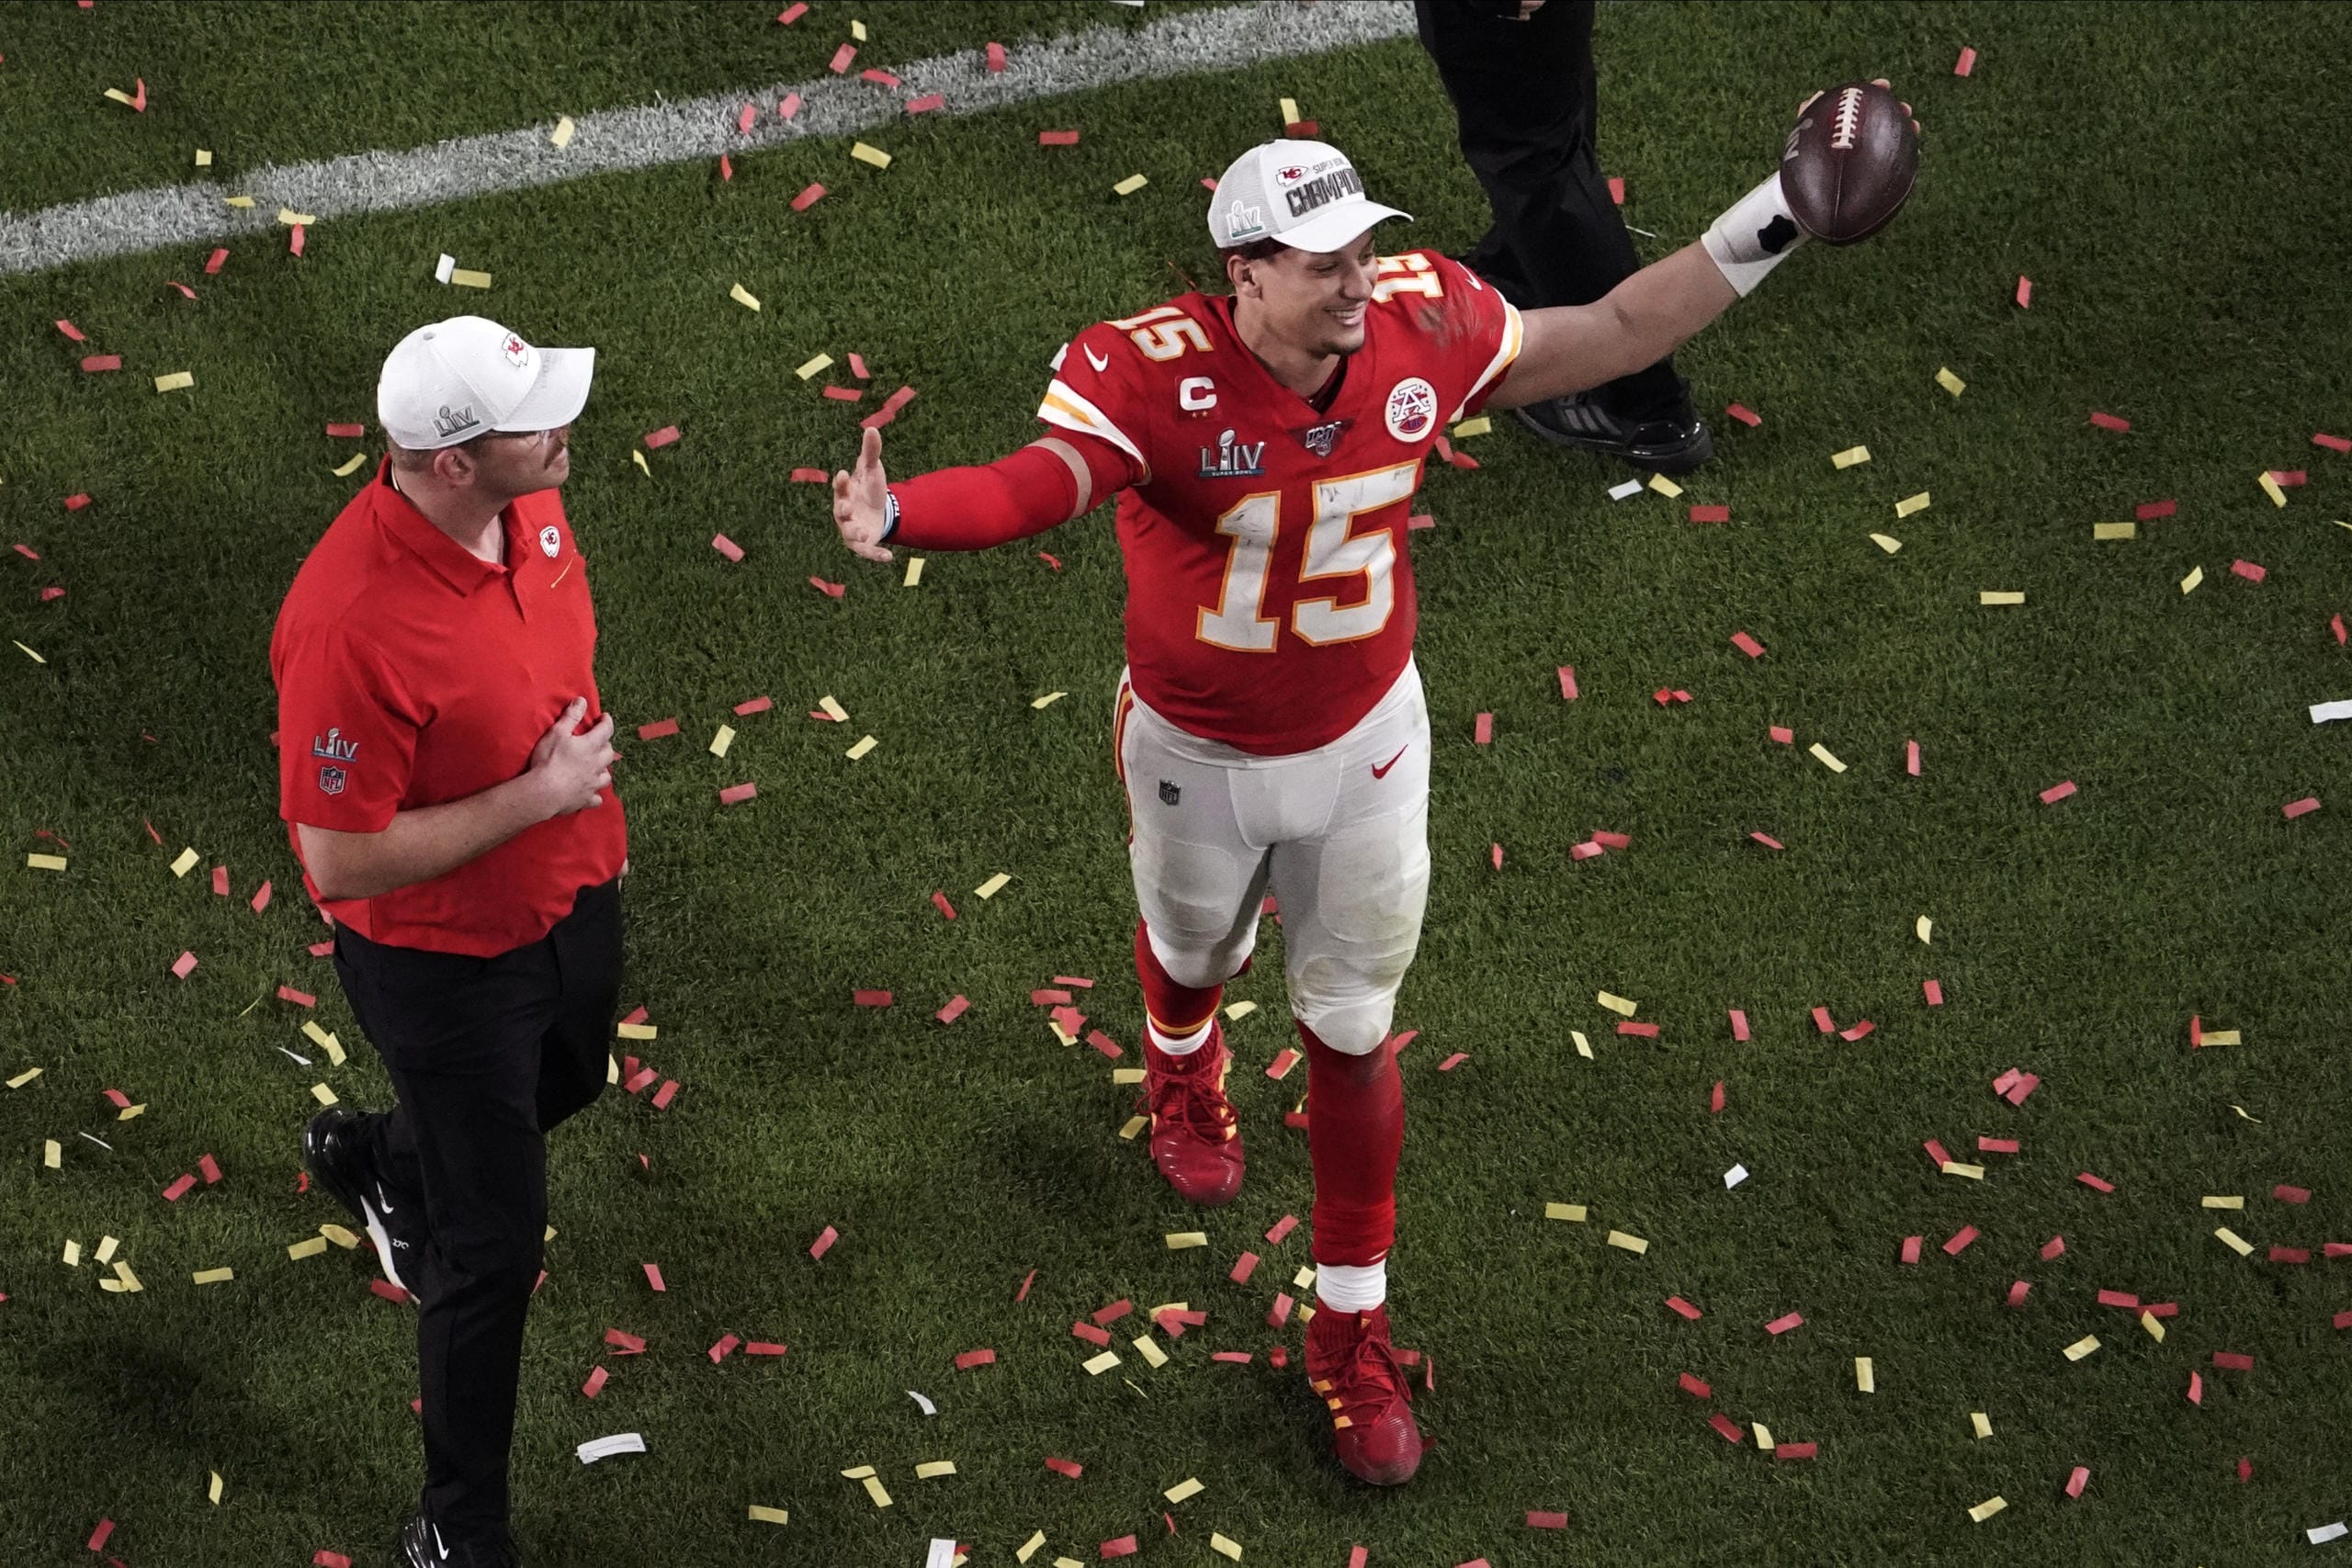 Mahomes leads Chiefs' rally past 49ers in Super Bowl, 31-20 - The